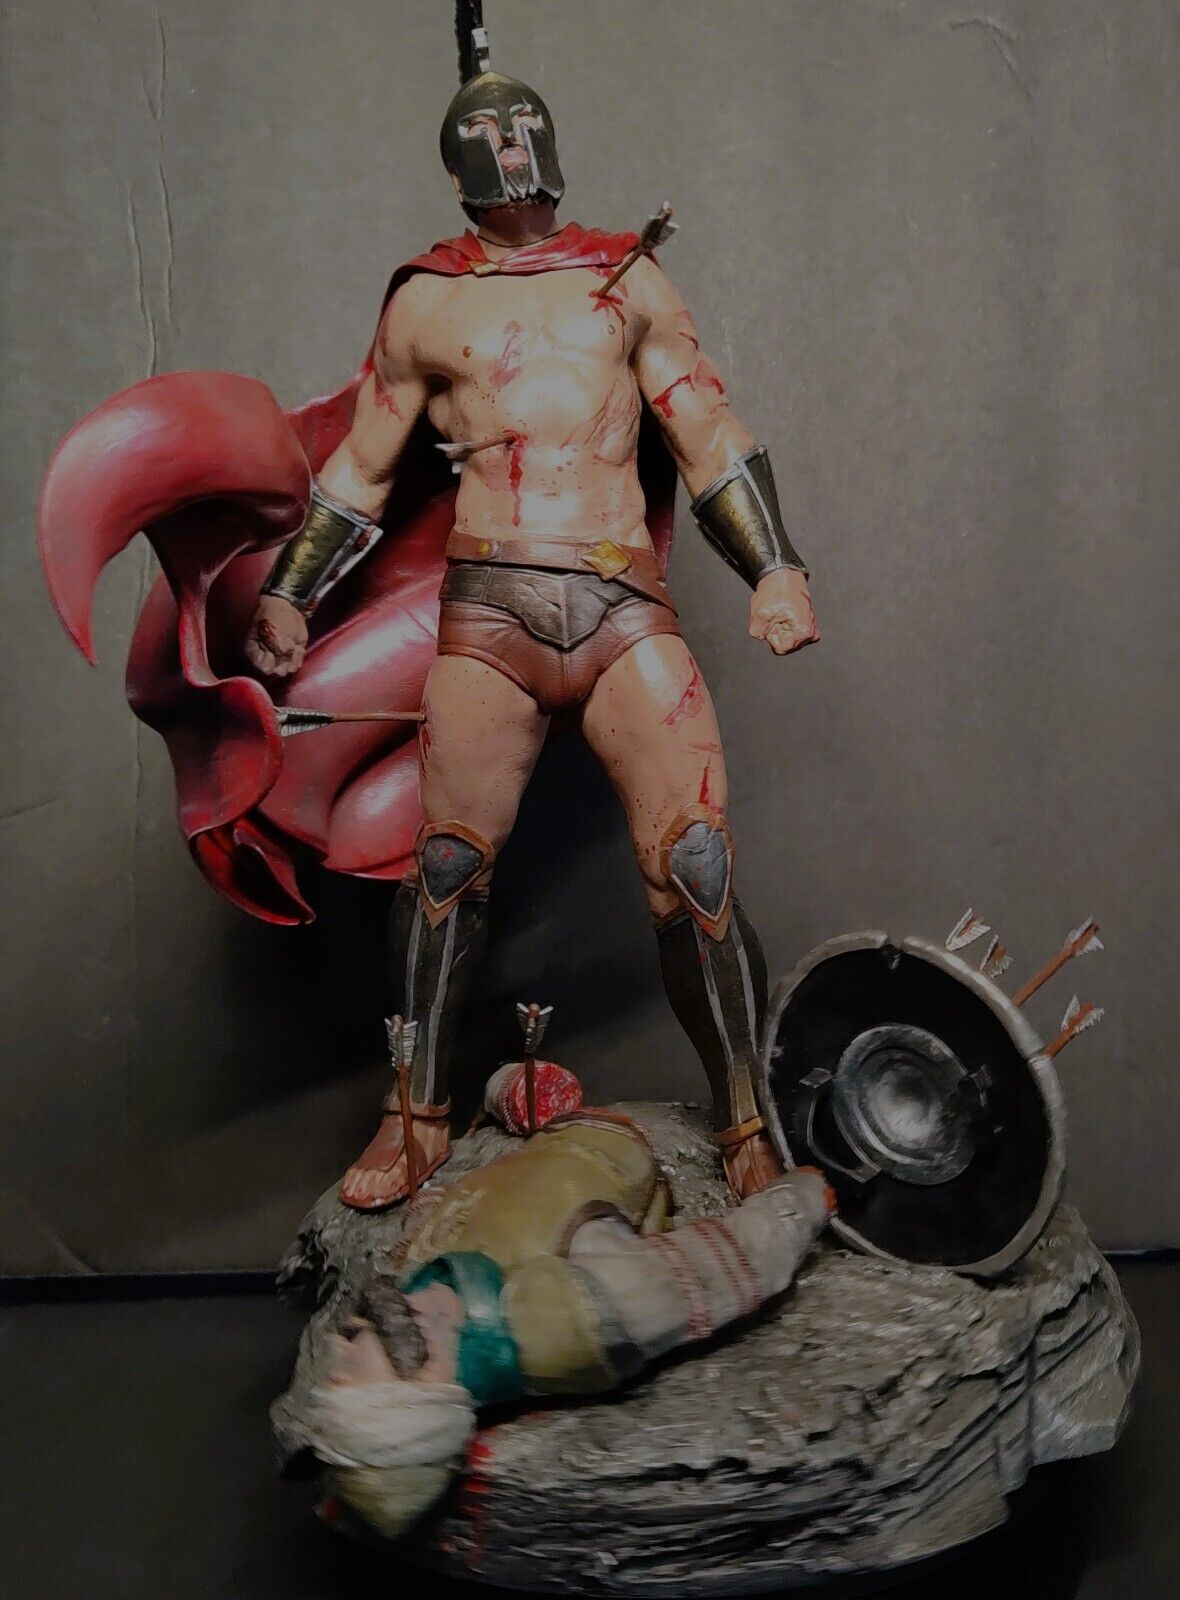 King Leonidas Spartan Legendary Warrior Soldier - Height of this shape:10inches